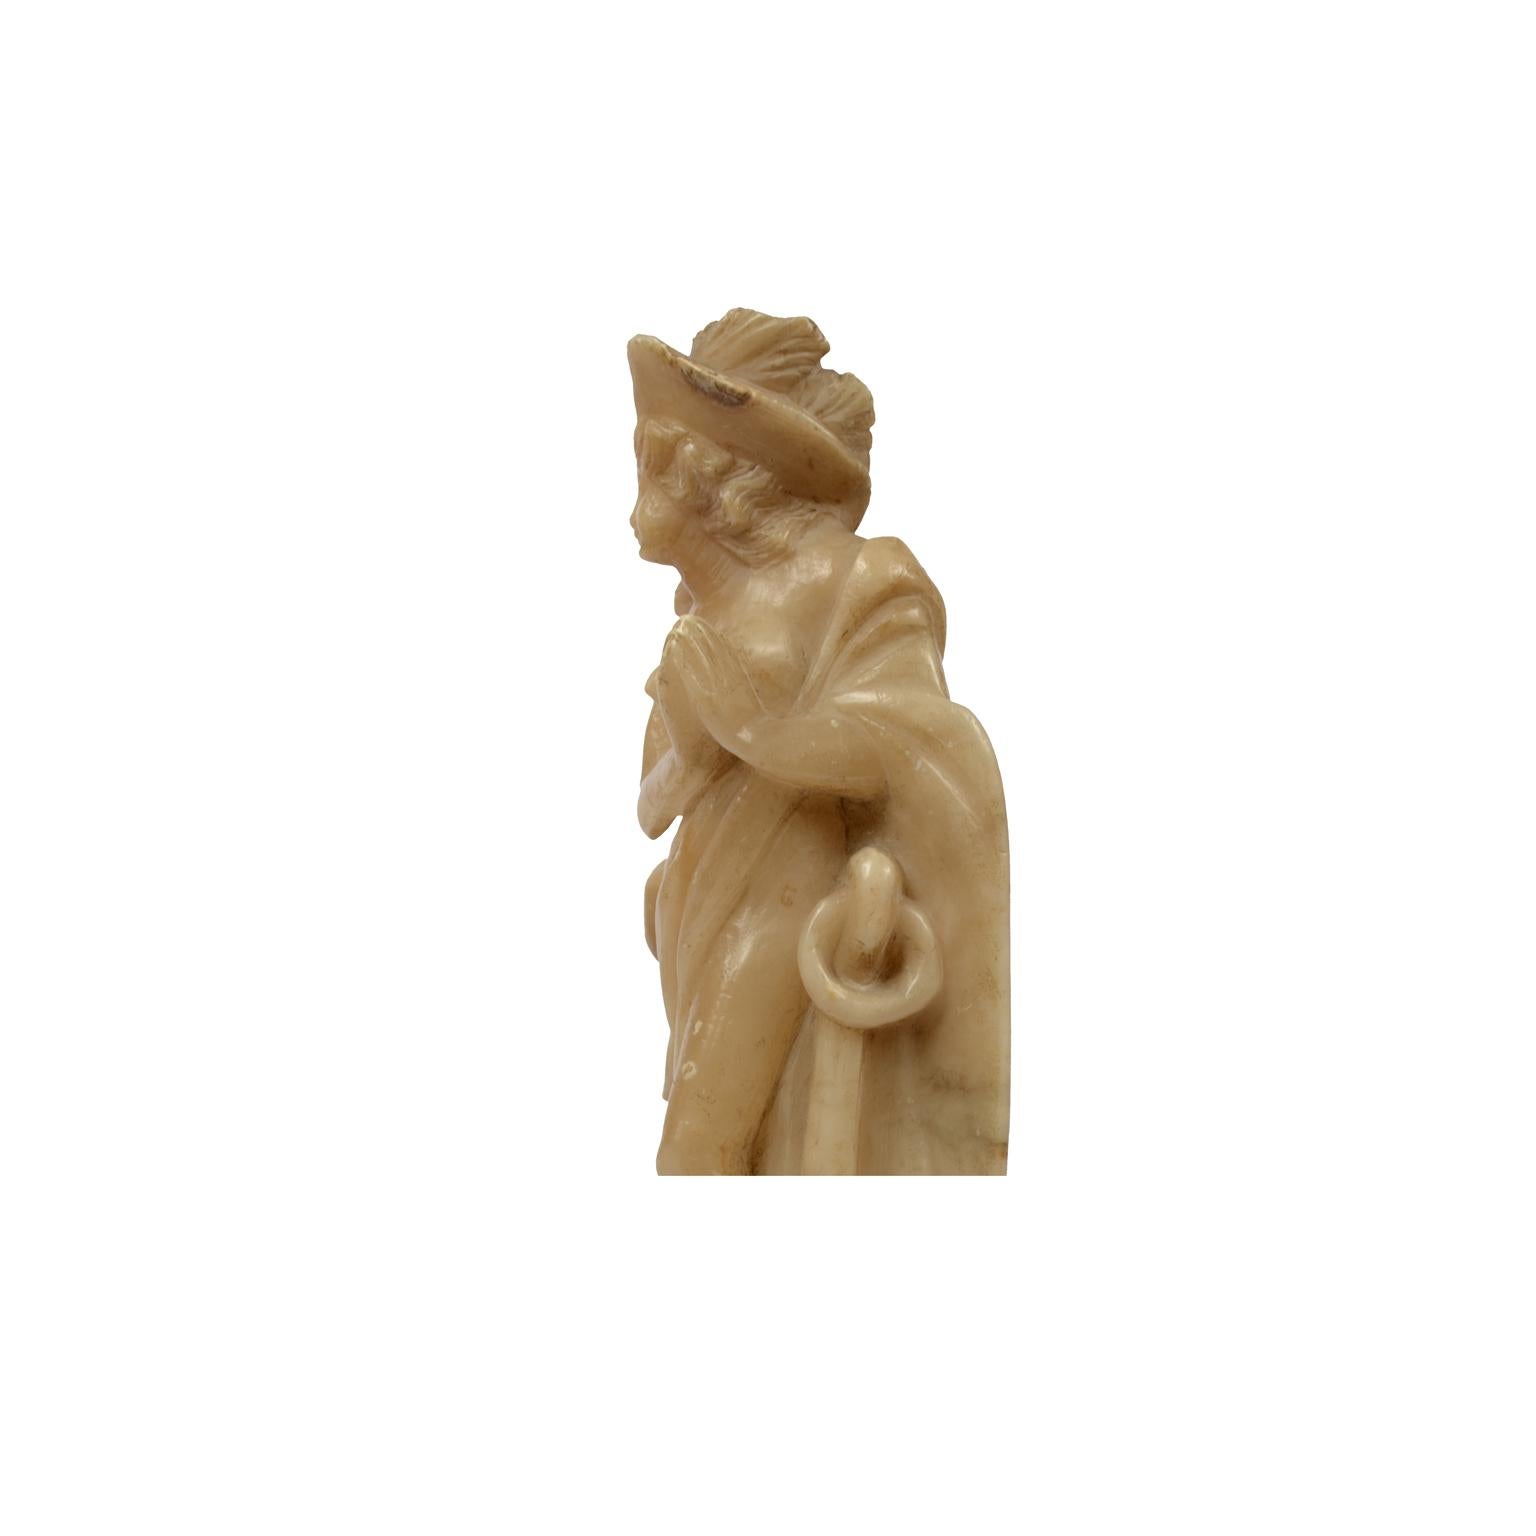 Mid-18th Century French Alabaster Sculpture Depicting a Female Nude with Anchor  For Sale 3